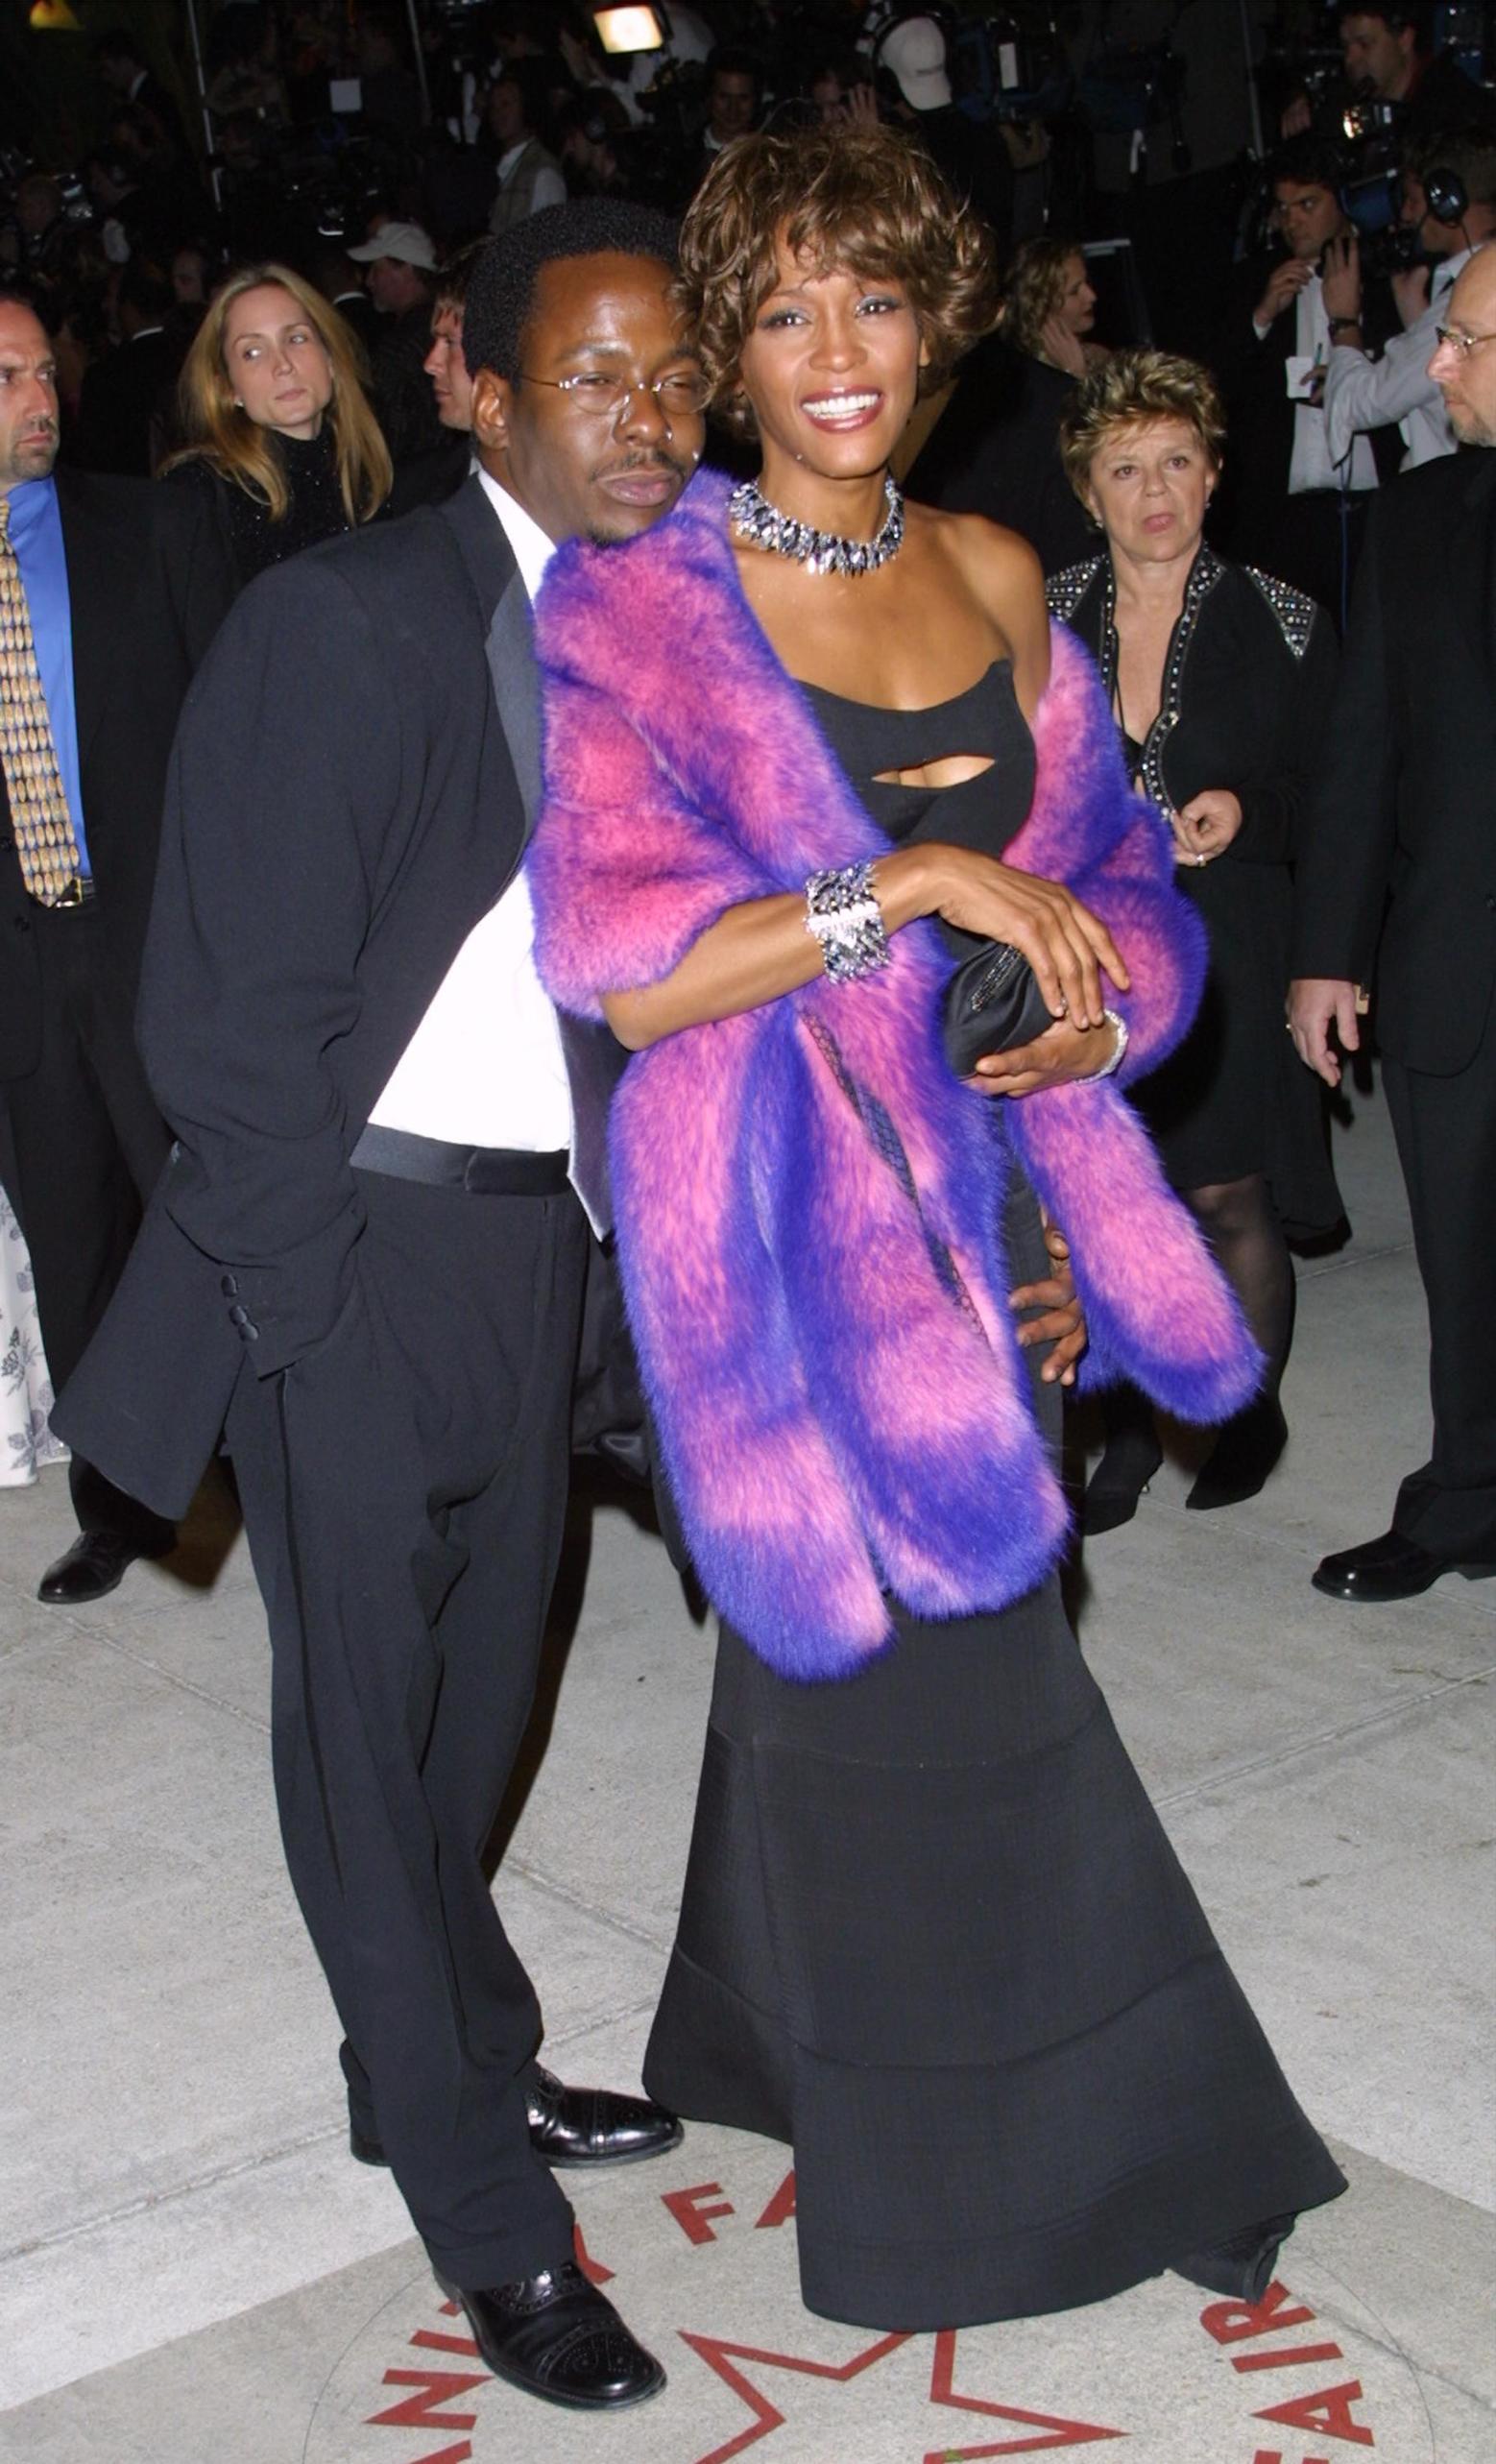 387028 41: Singer Whitney Houston and husband Bobby Brown arrive at the Vanity Fair post Oscar party March 25, 2001 at Morton's restaurant in West Hollywood. (Photo by Jason Kirk/Getty Images)